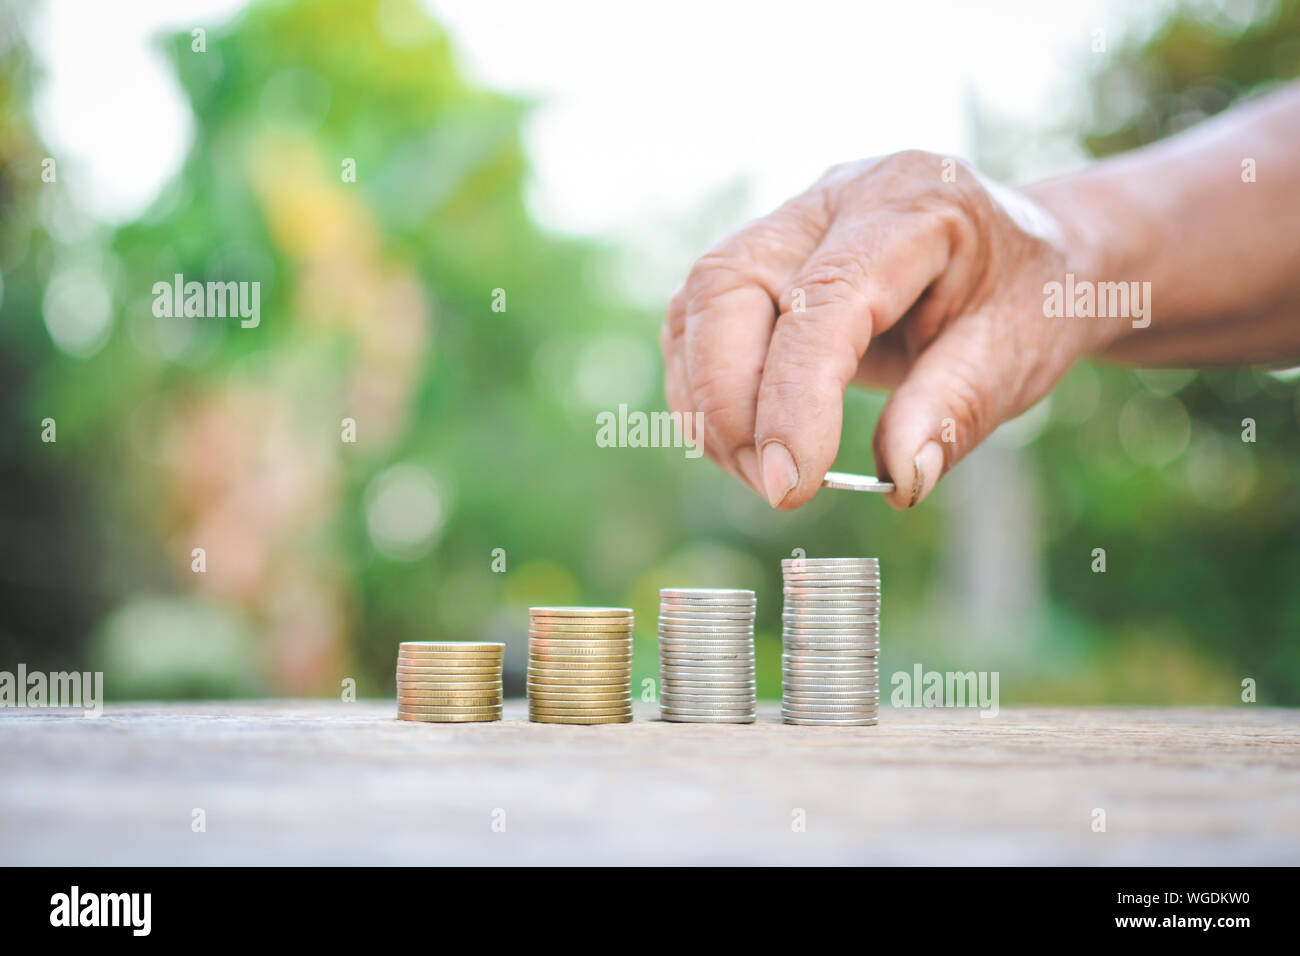 Cropped Hand Arranging Coins On Table Against Trees Stock Photo